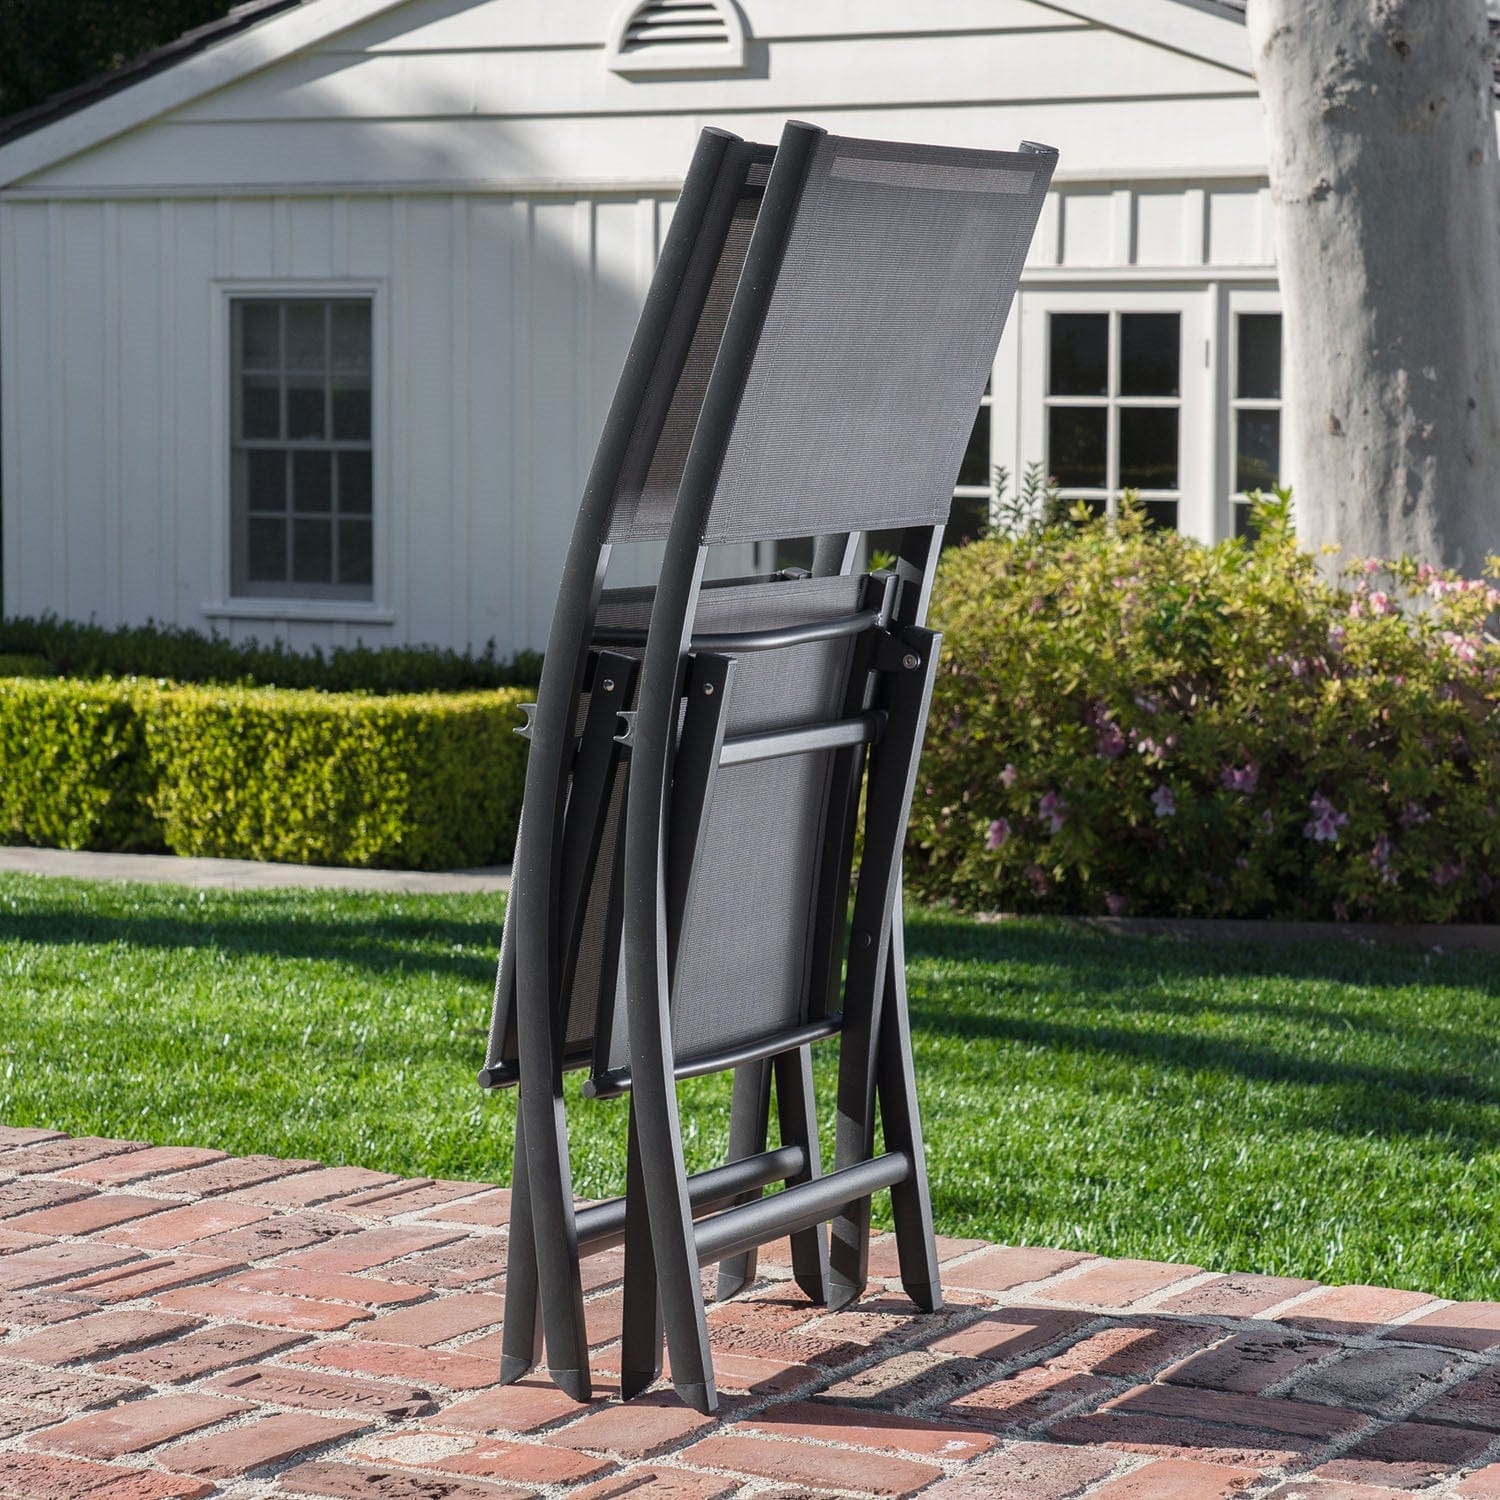 Hanover Outdoor Dining Set Hanover - Naples7pc: 6 Aluminum Folding Sling Chairs, Aluminum Extension Table